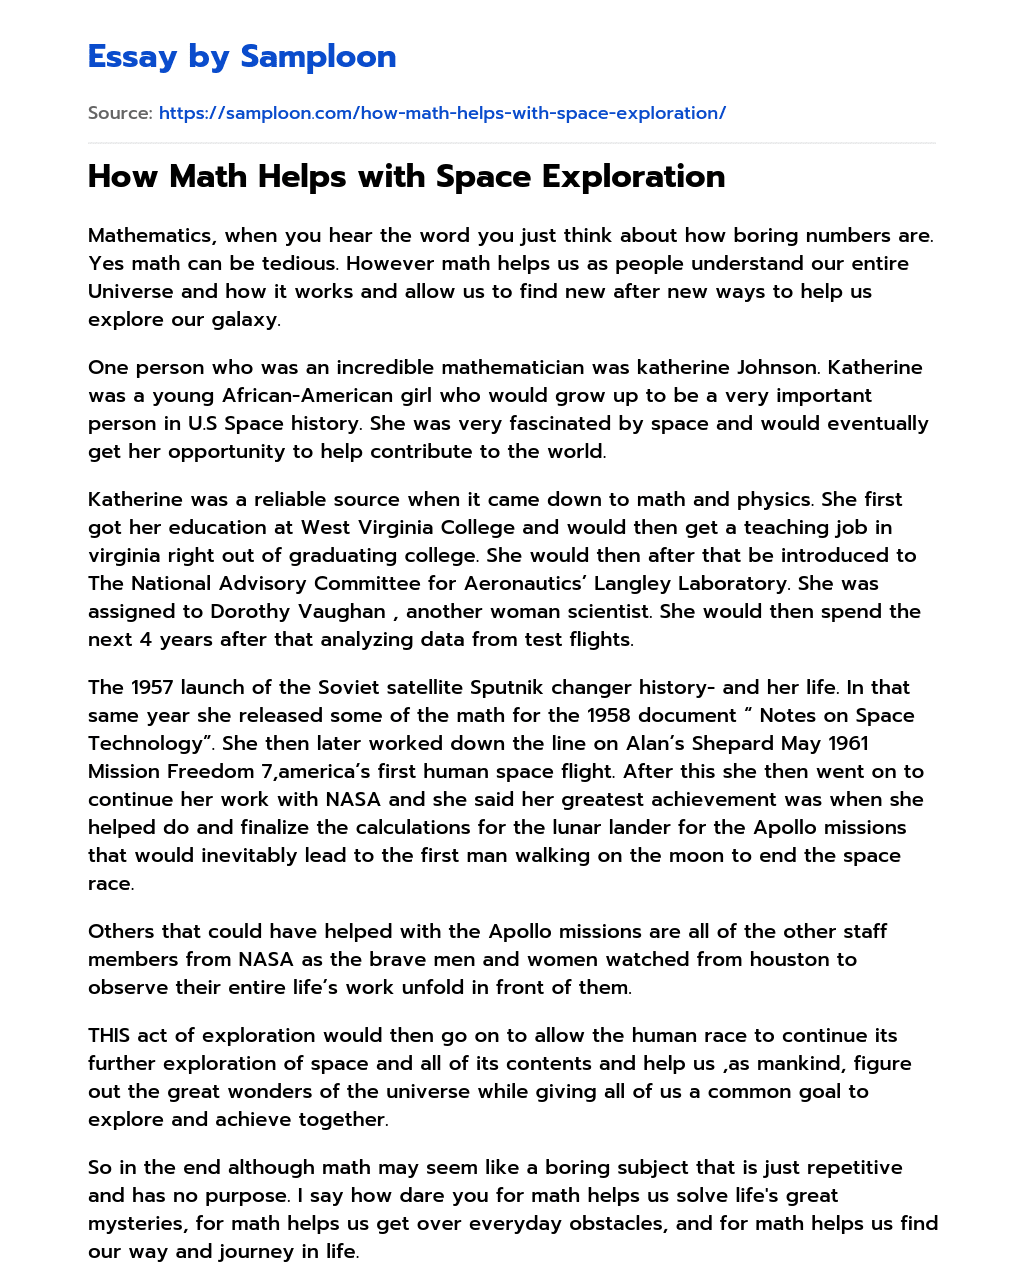 How Math Helps with Space Exploration essay